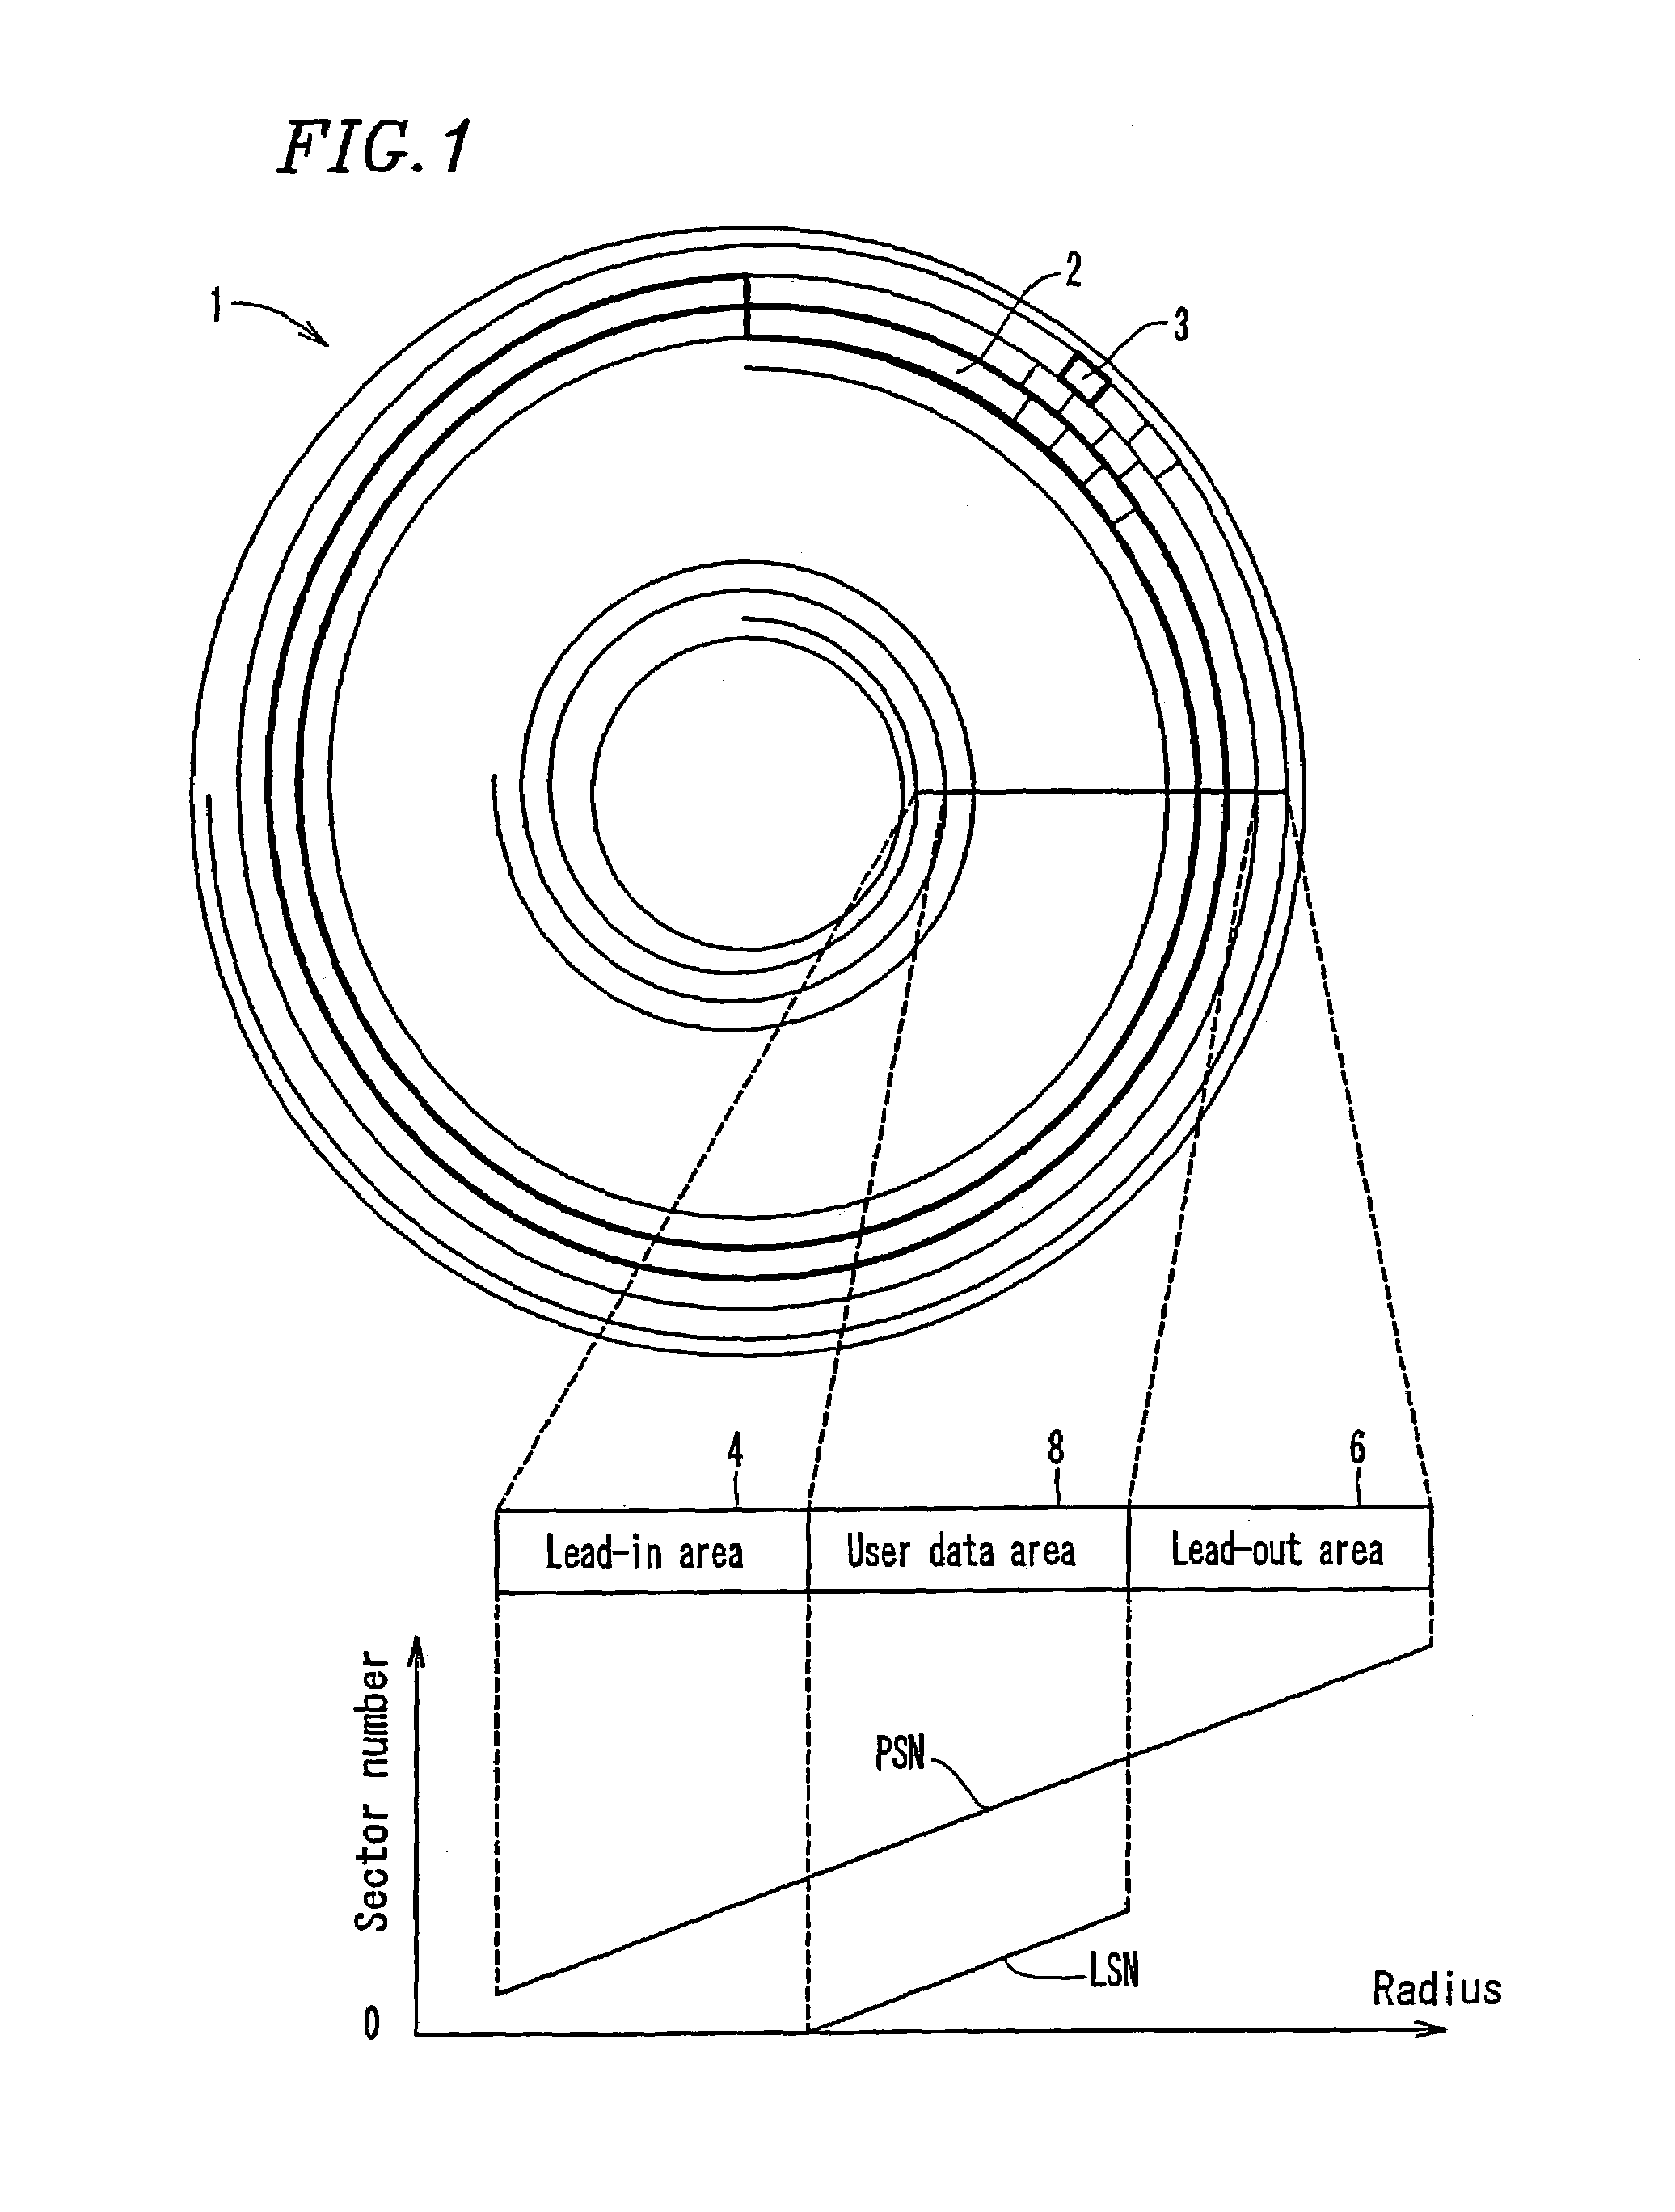 Multi-layered information recording medium with spare defect management areas